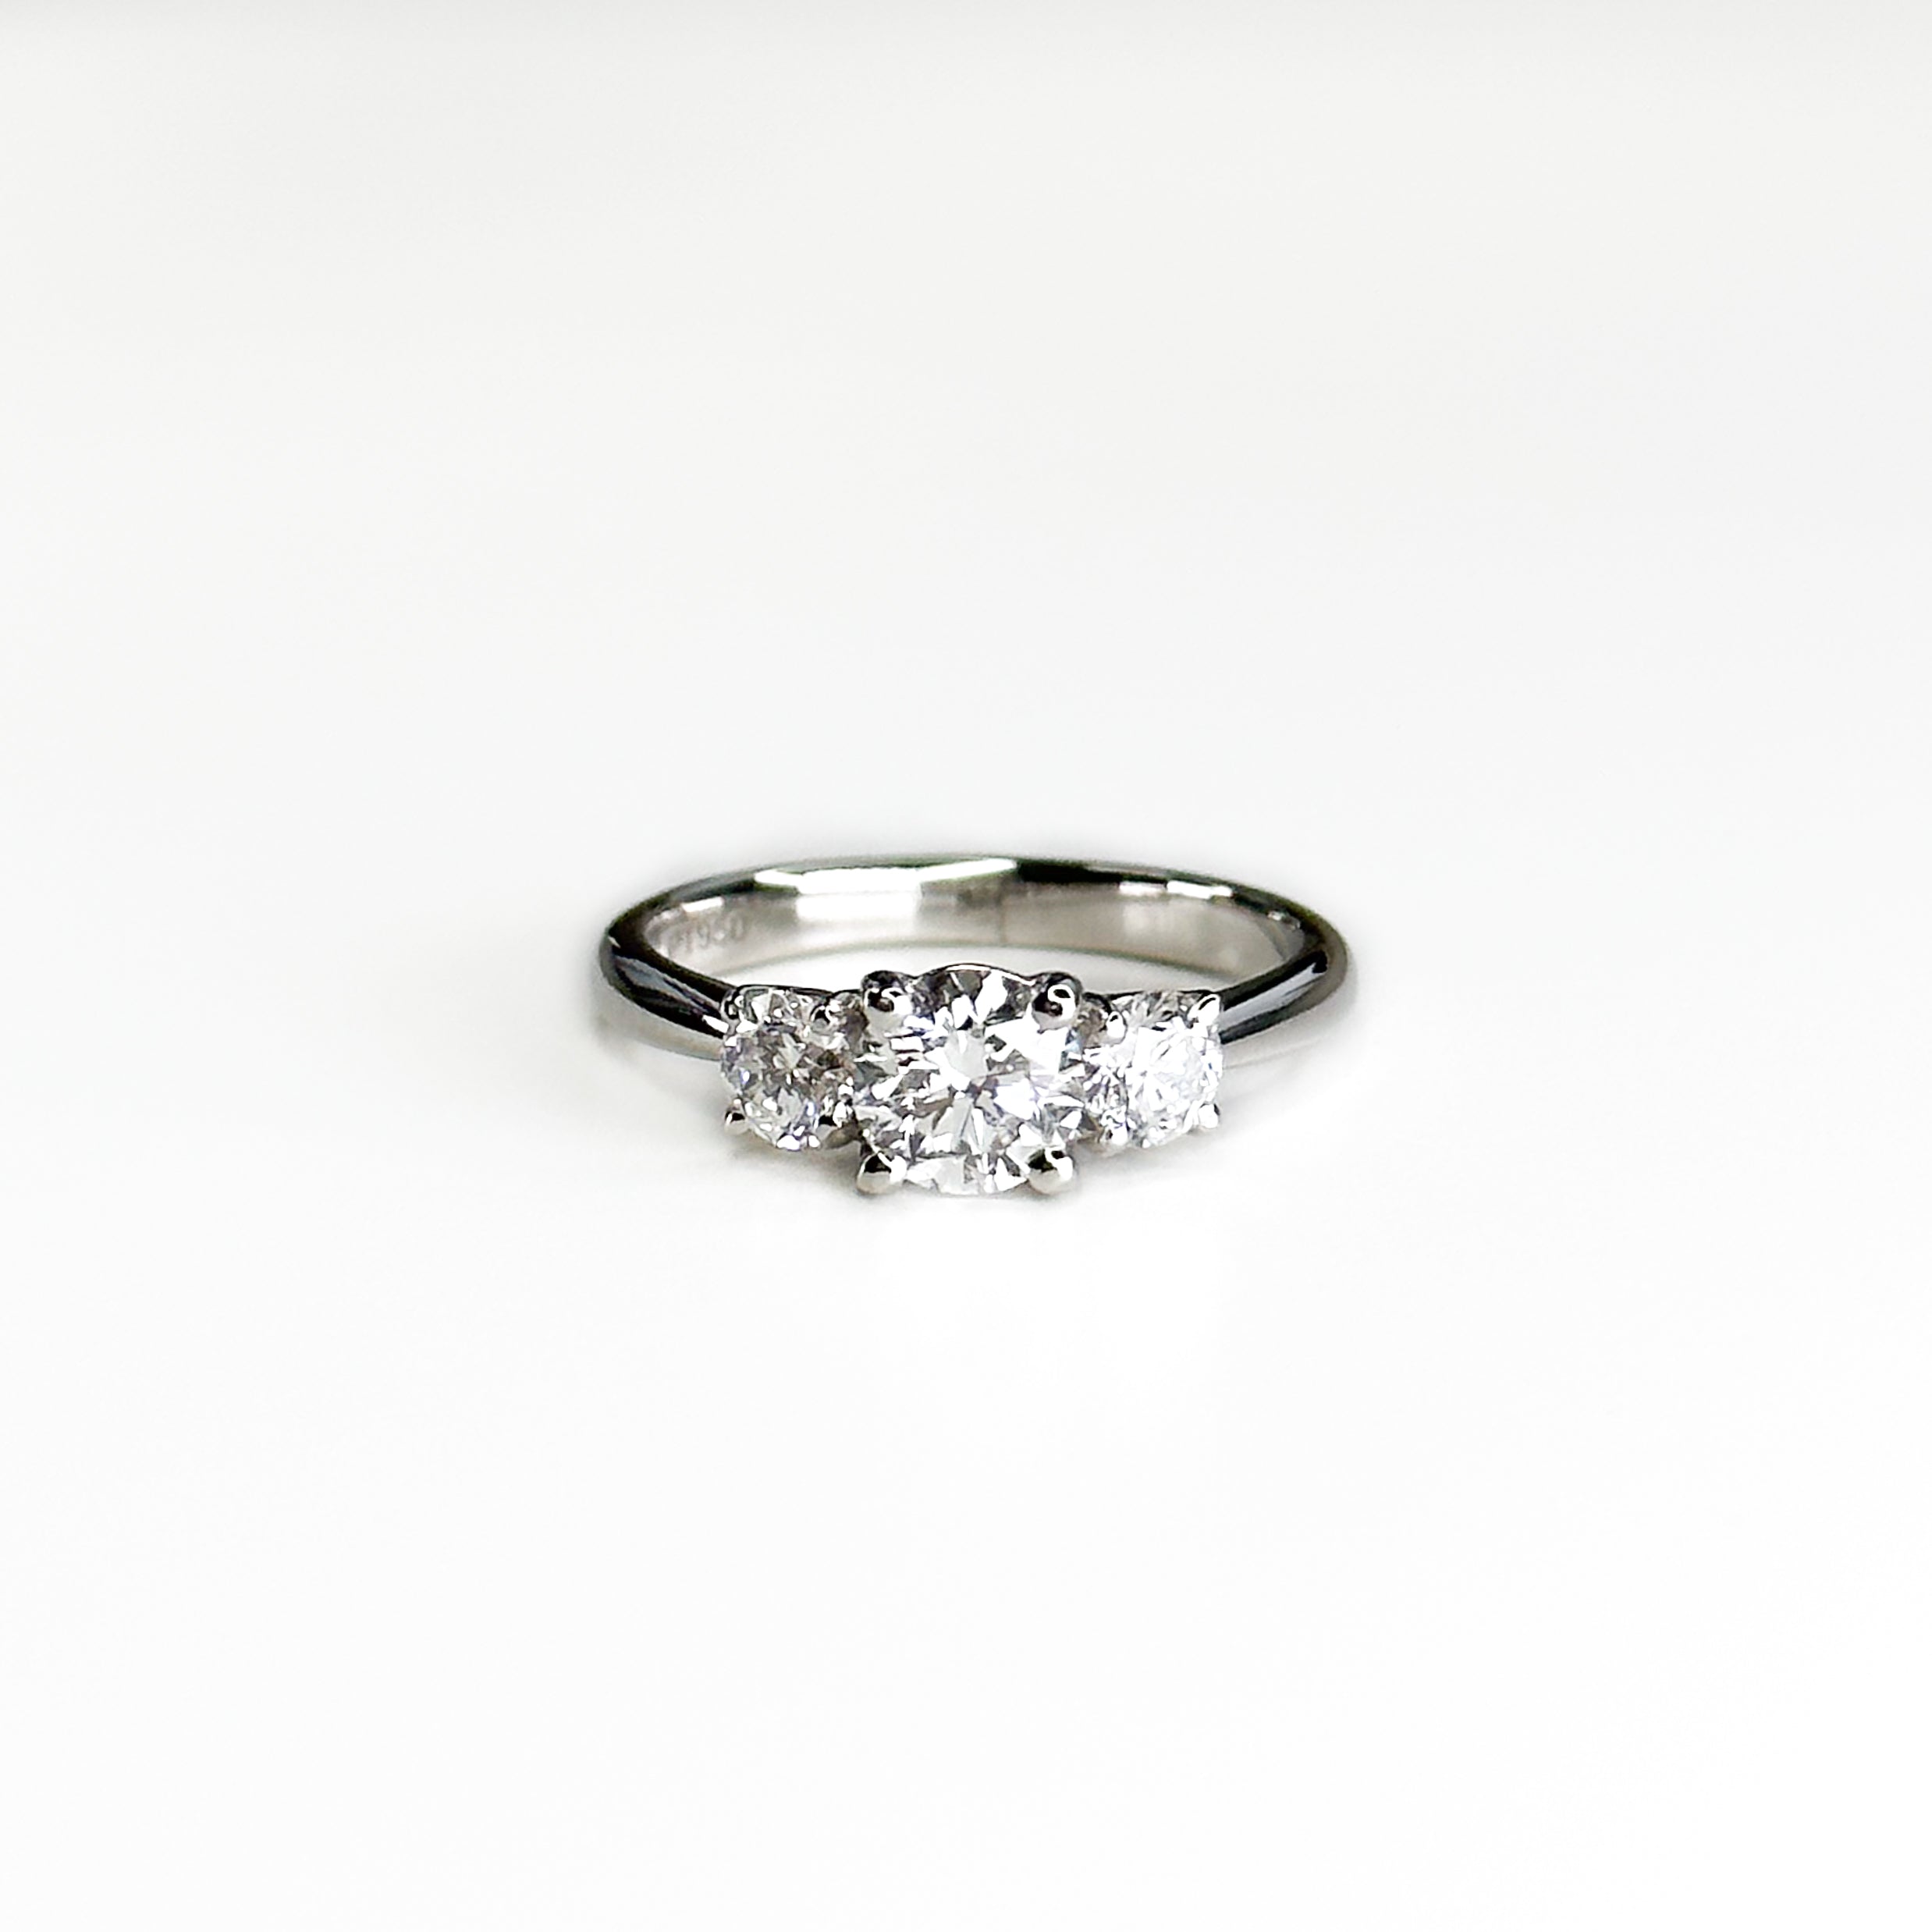 Diamond Trilogy Ring with 0.70ct Round Centre Stone